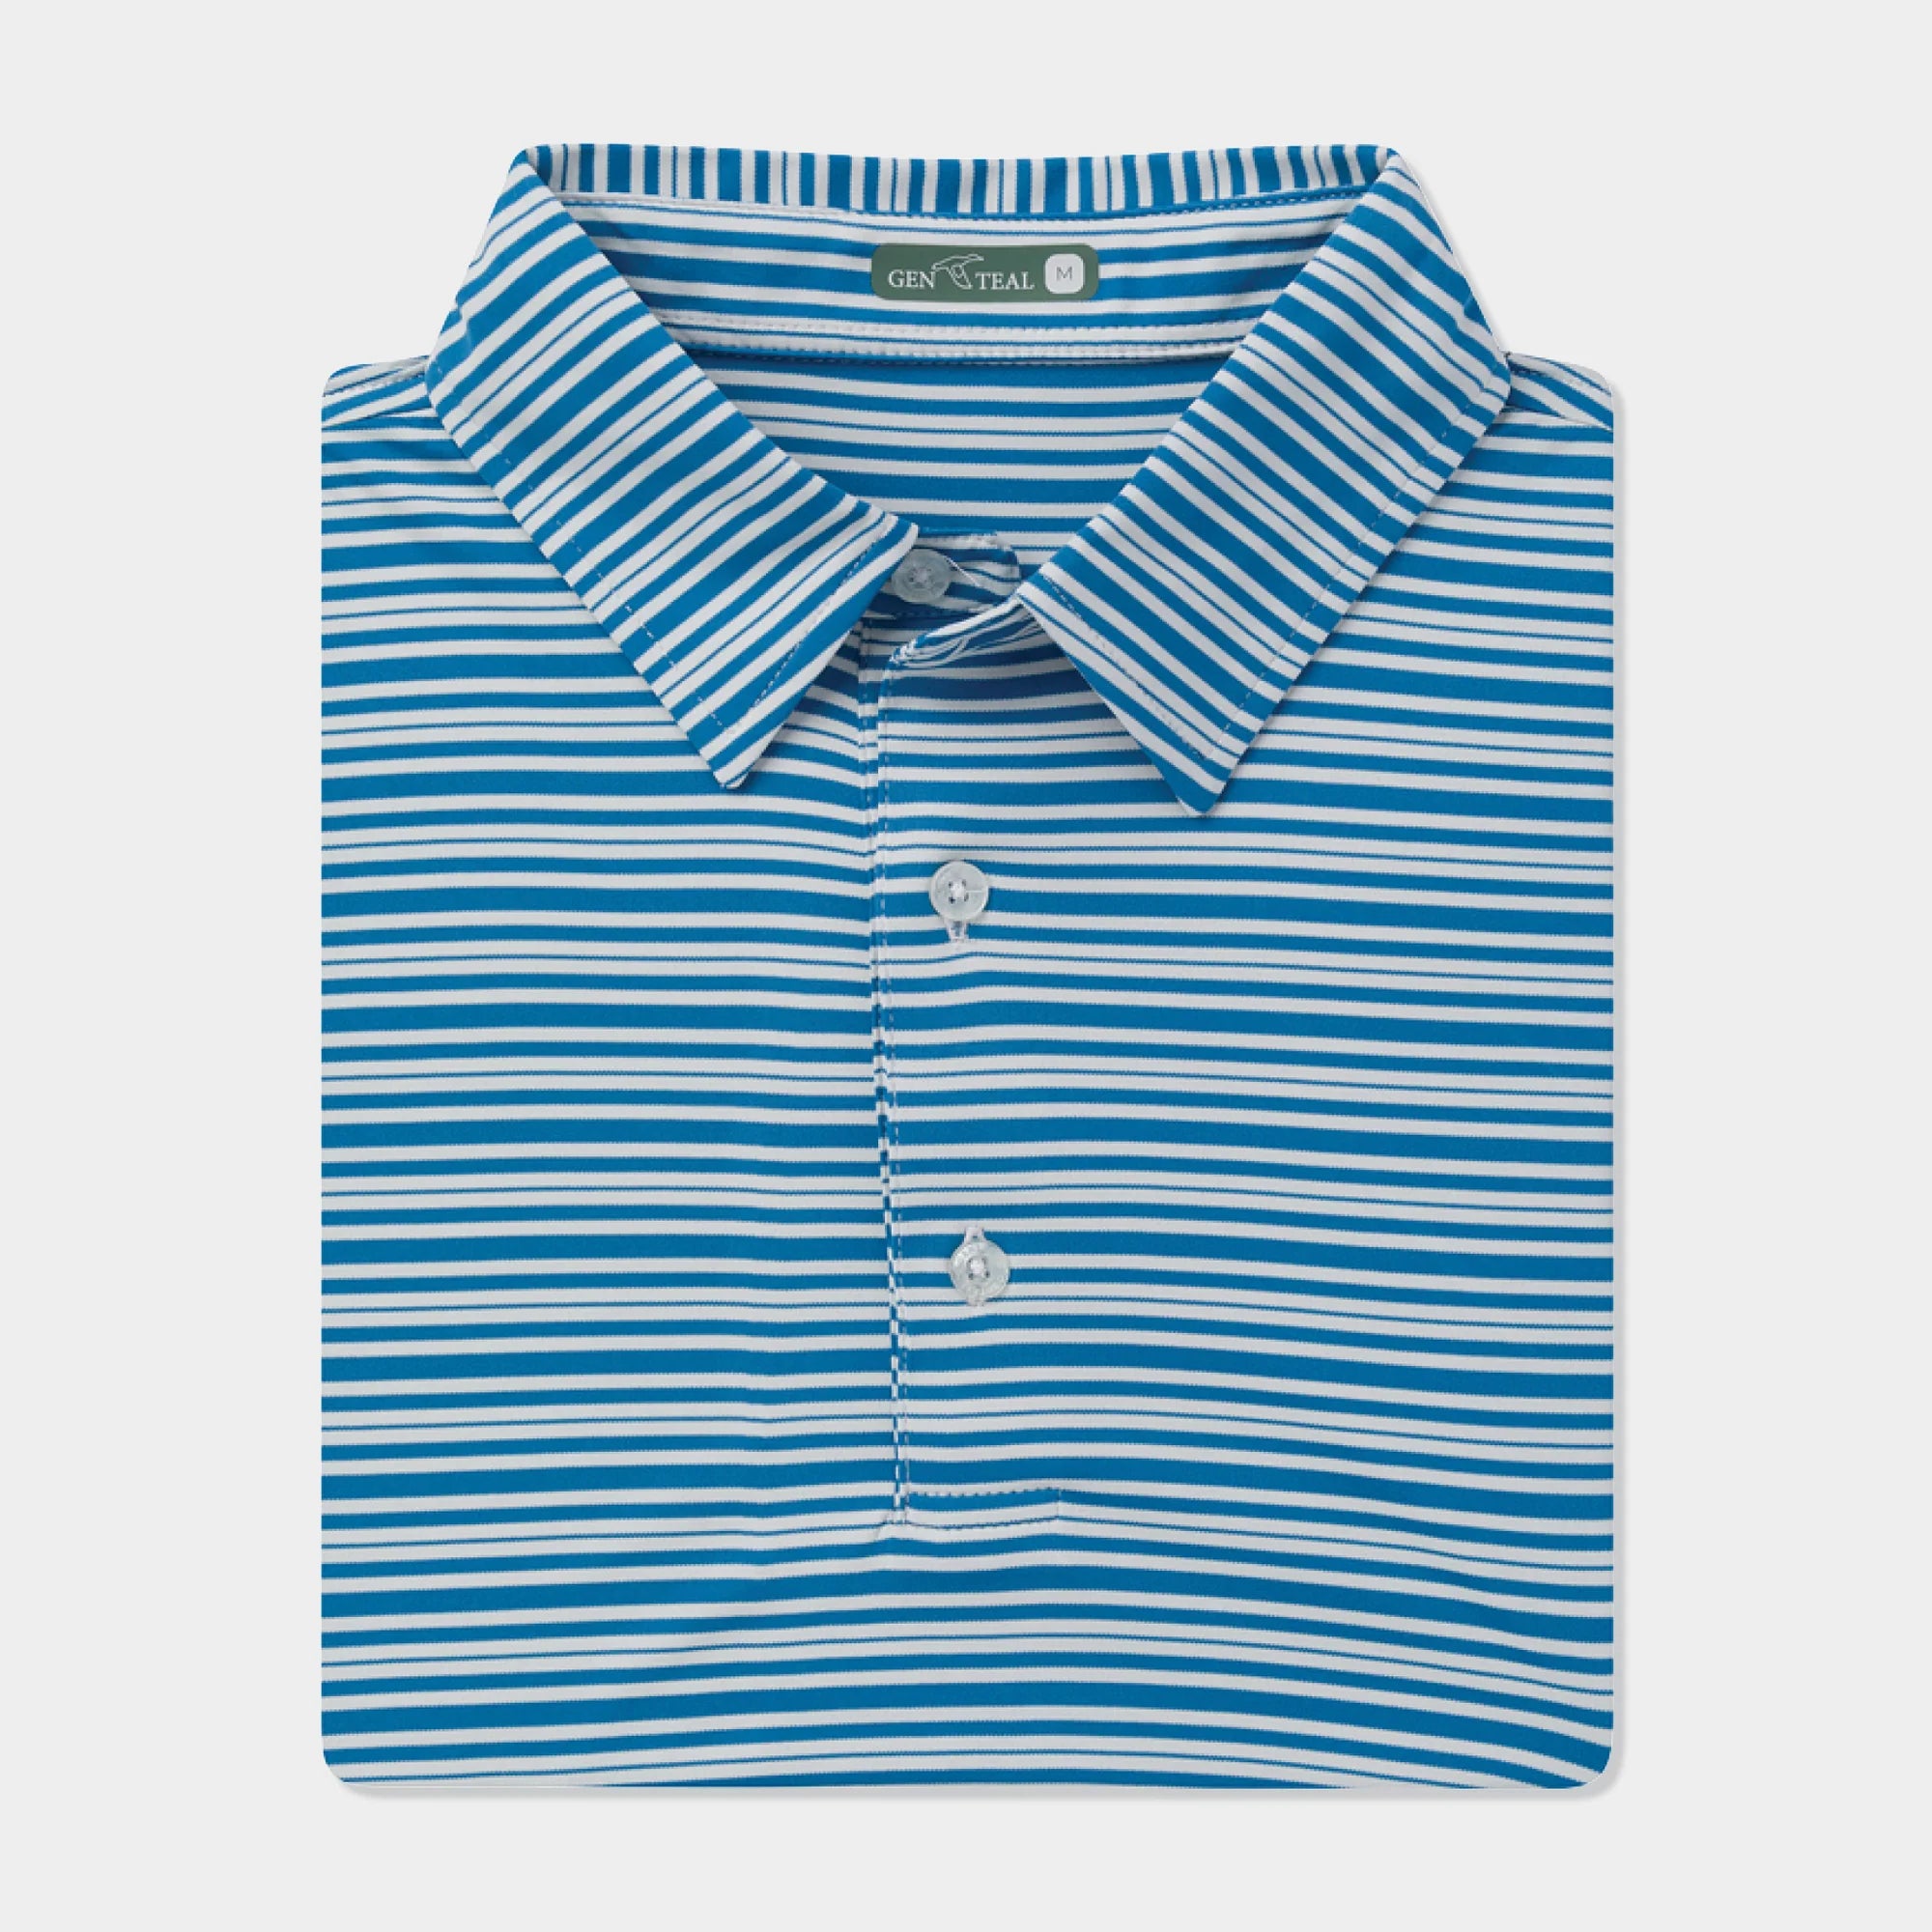 GENTEAL Men's Polo Genteal Caddie LiteTec Performance Polo || David's Clothing